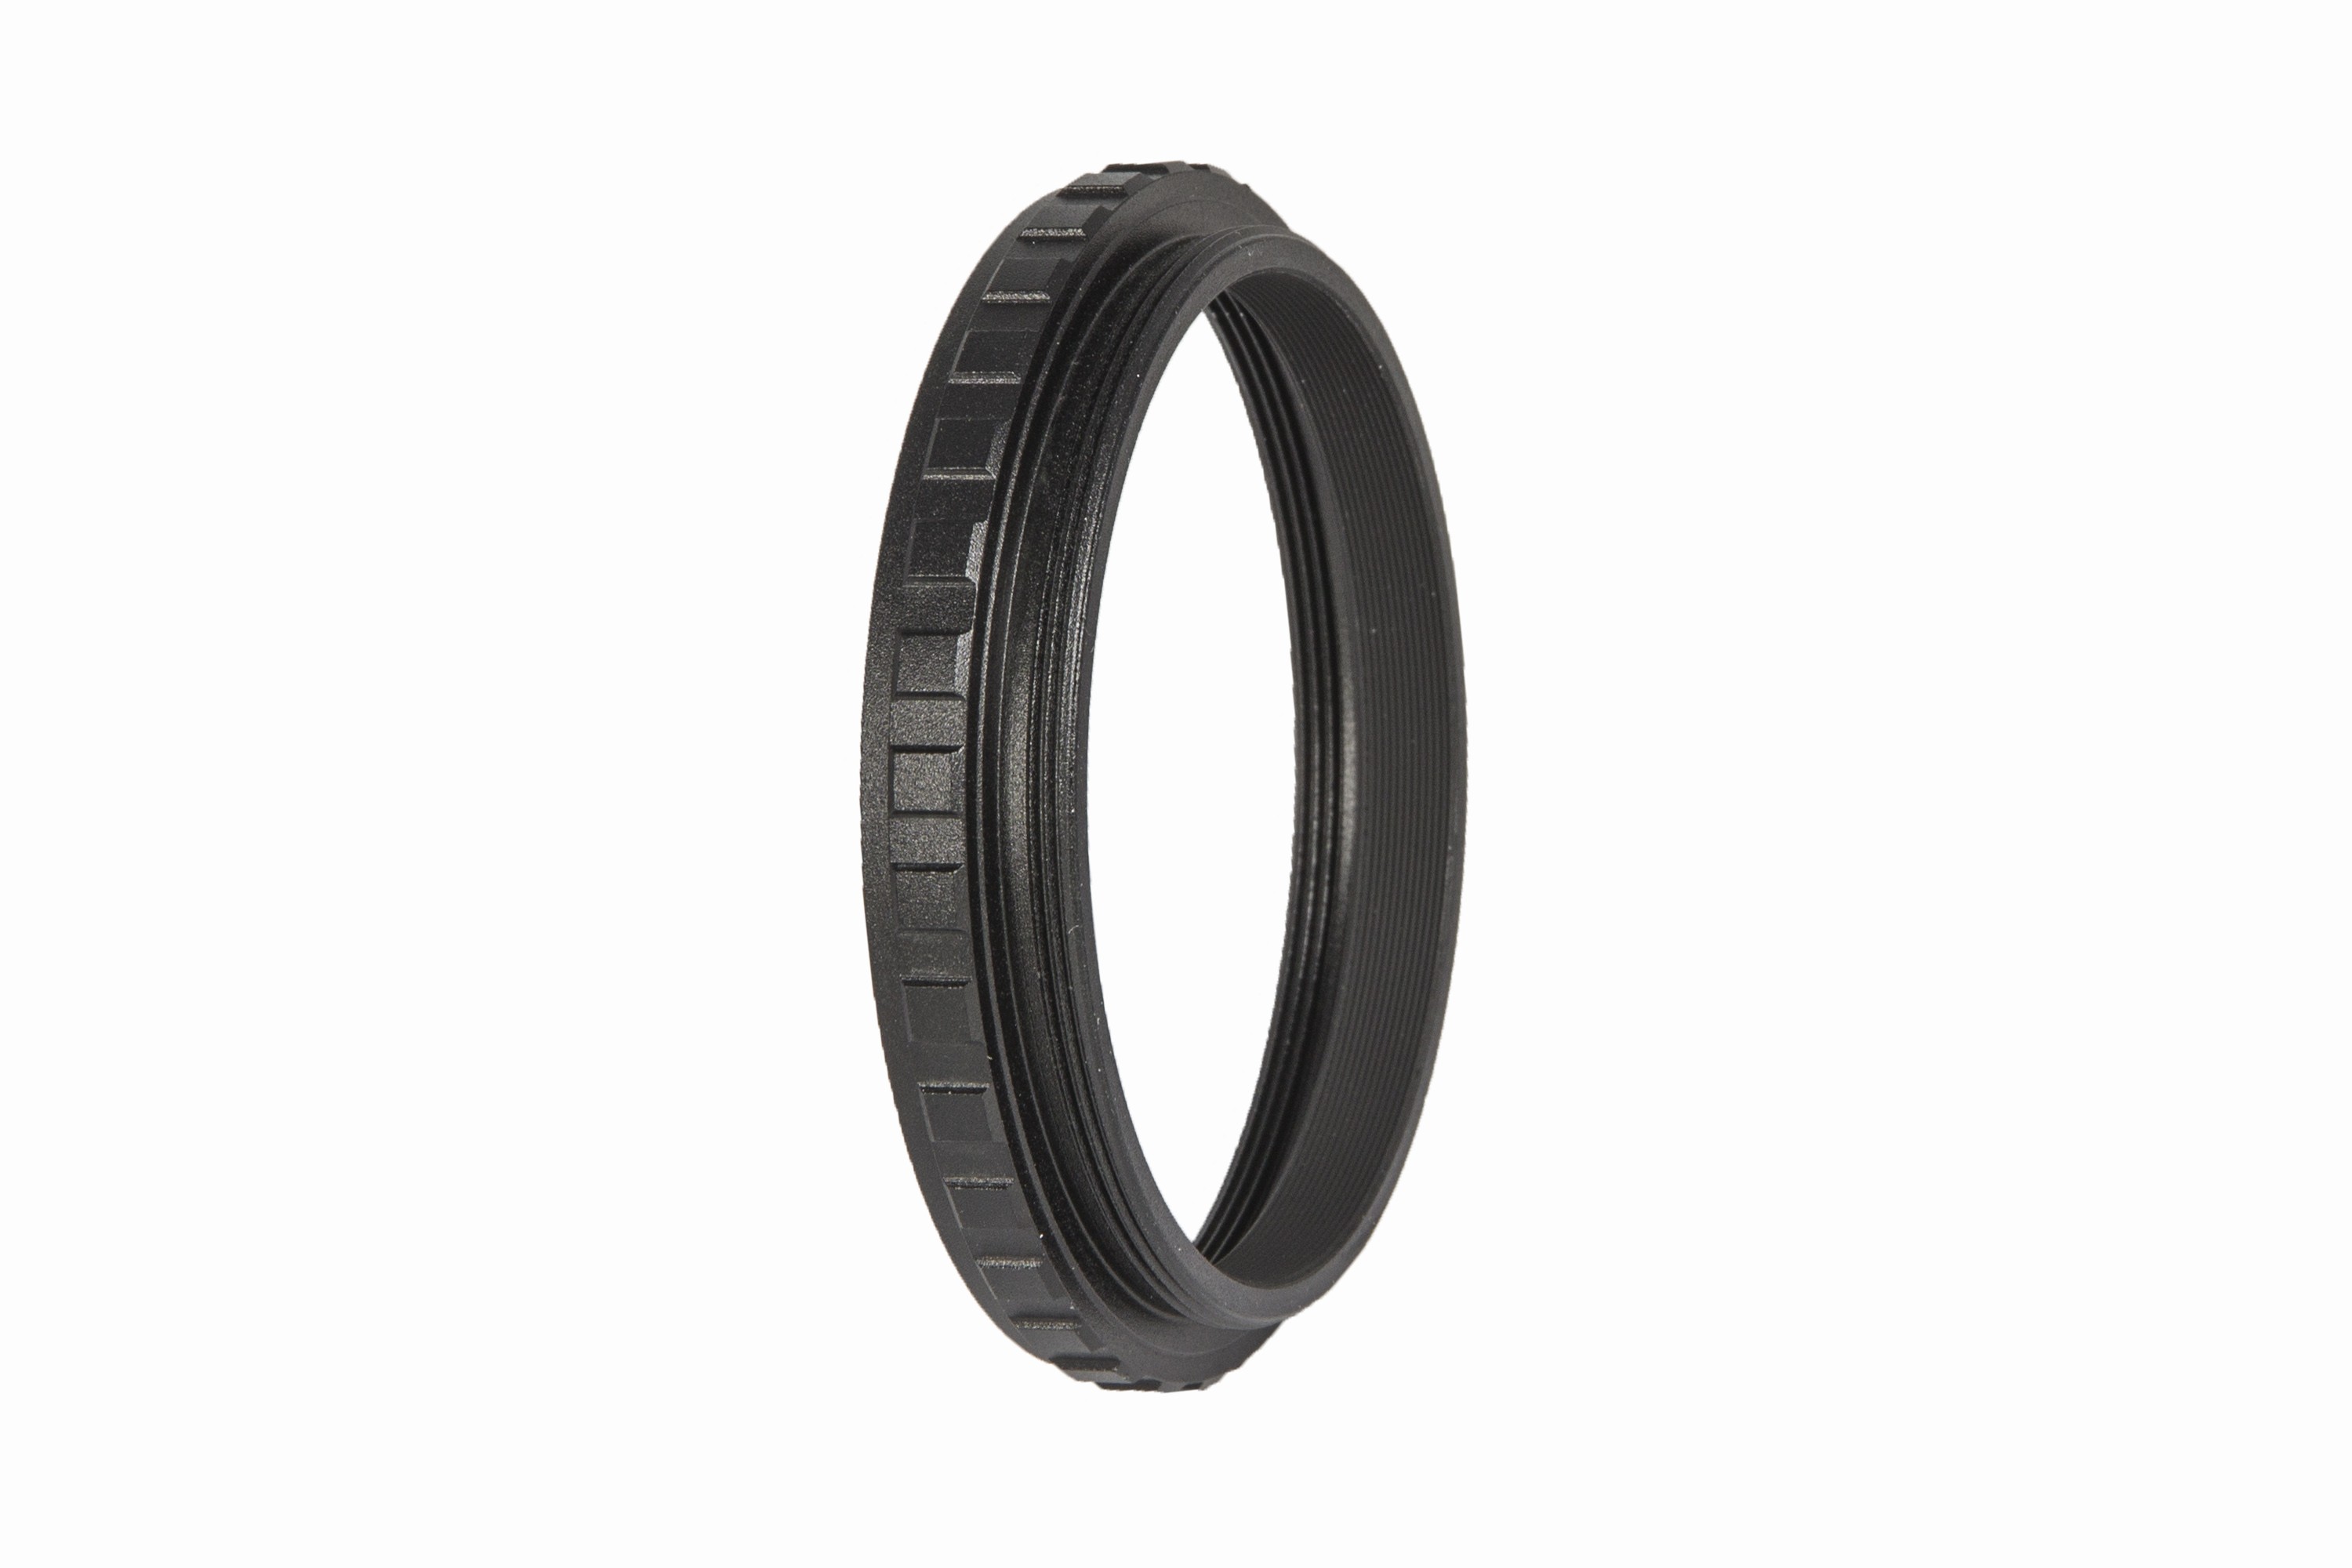 Baader M68 Extension tube 7.5mm